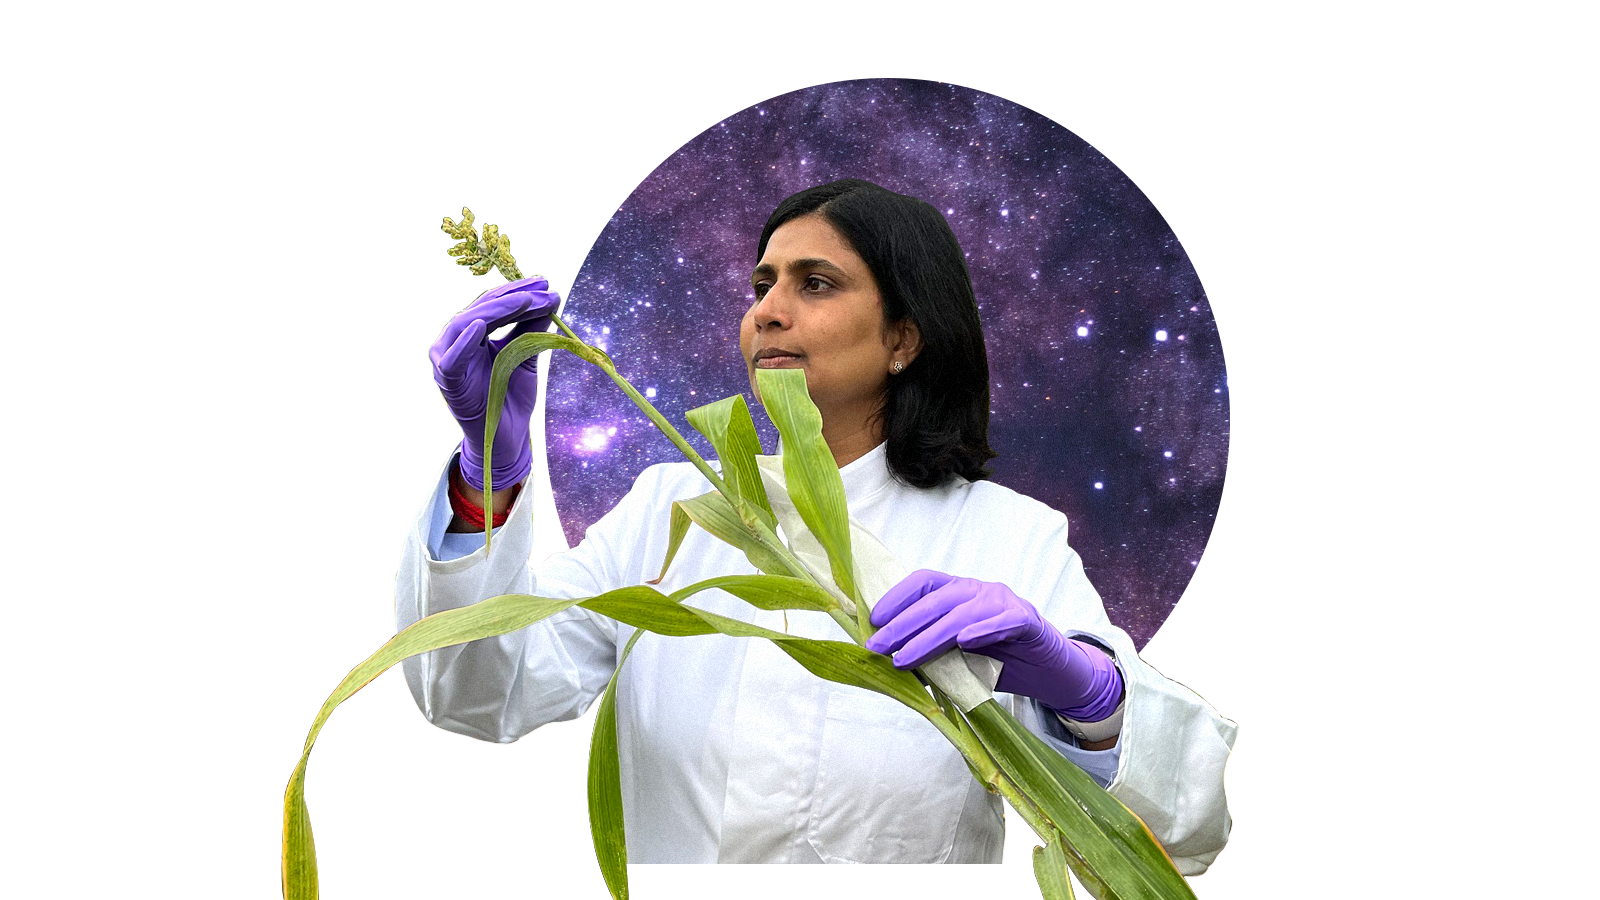 A collage of a woman in purple nitrile gloves holding a long plant stalk. In the background there is a circle with stars and space